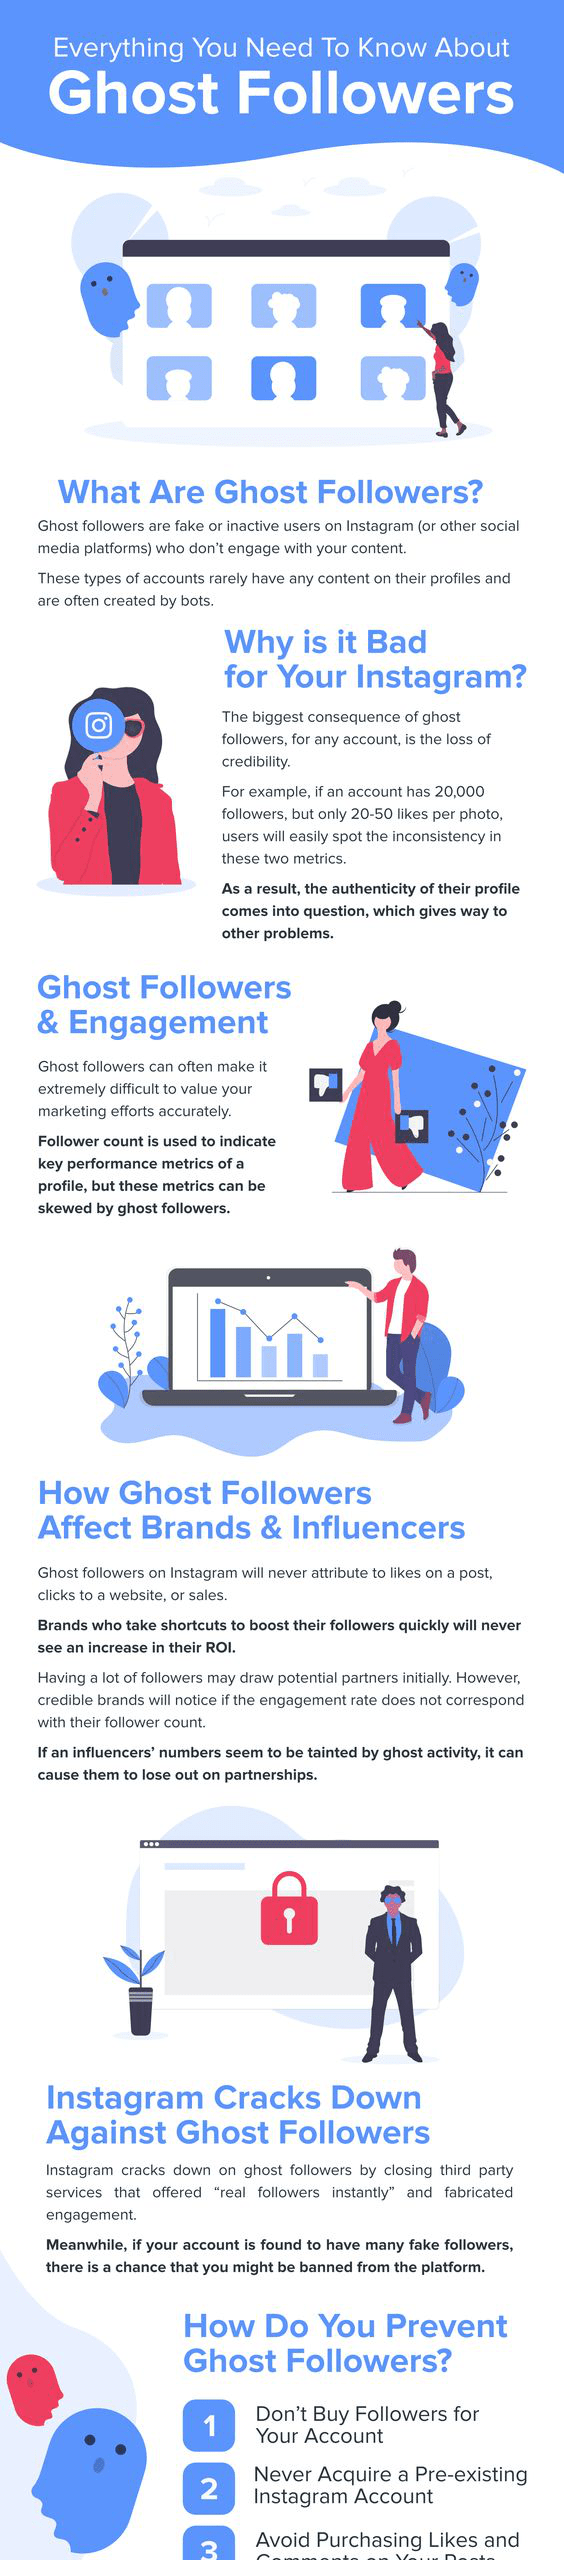 What You Should Know About Ghost Followers on Instagram